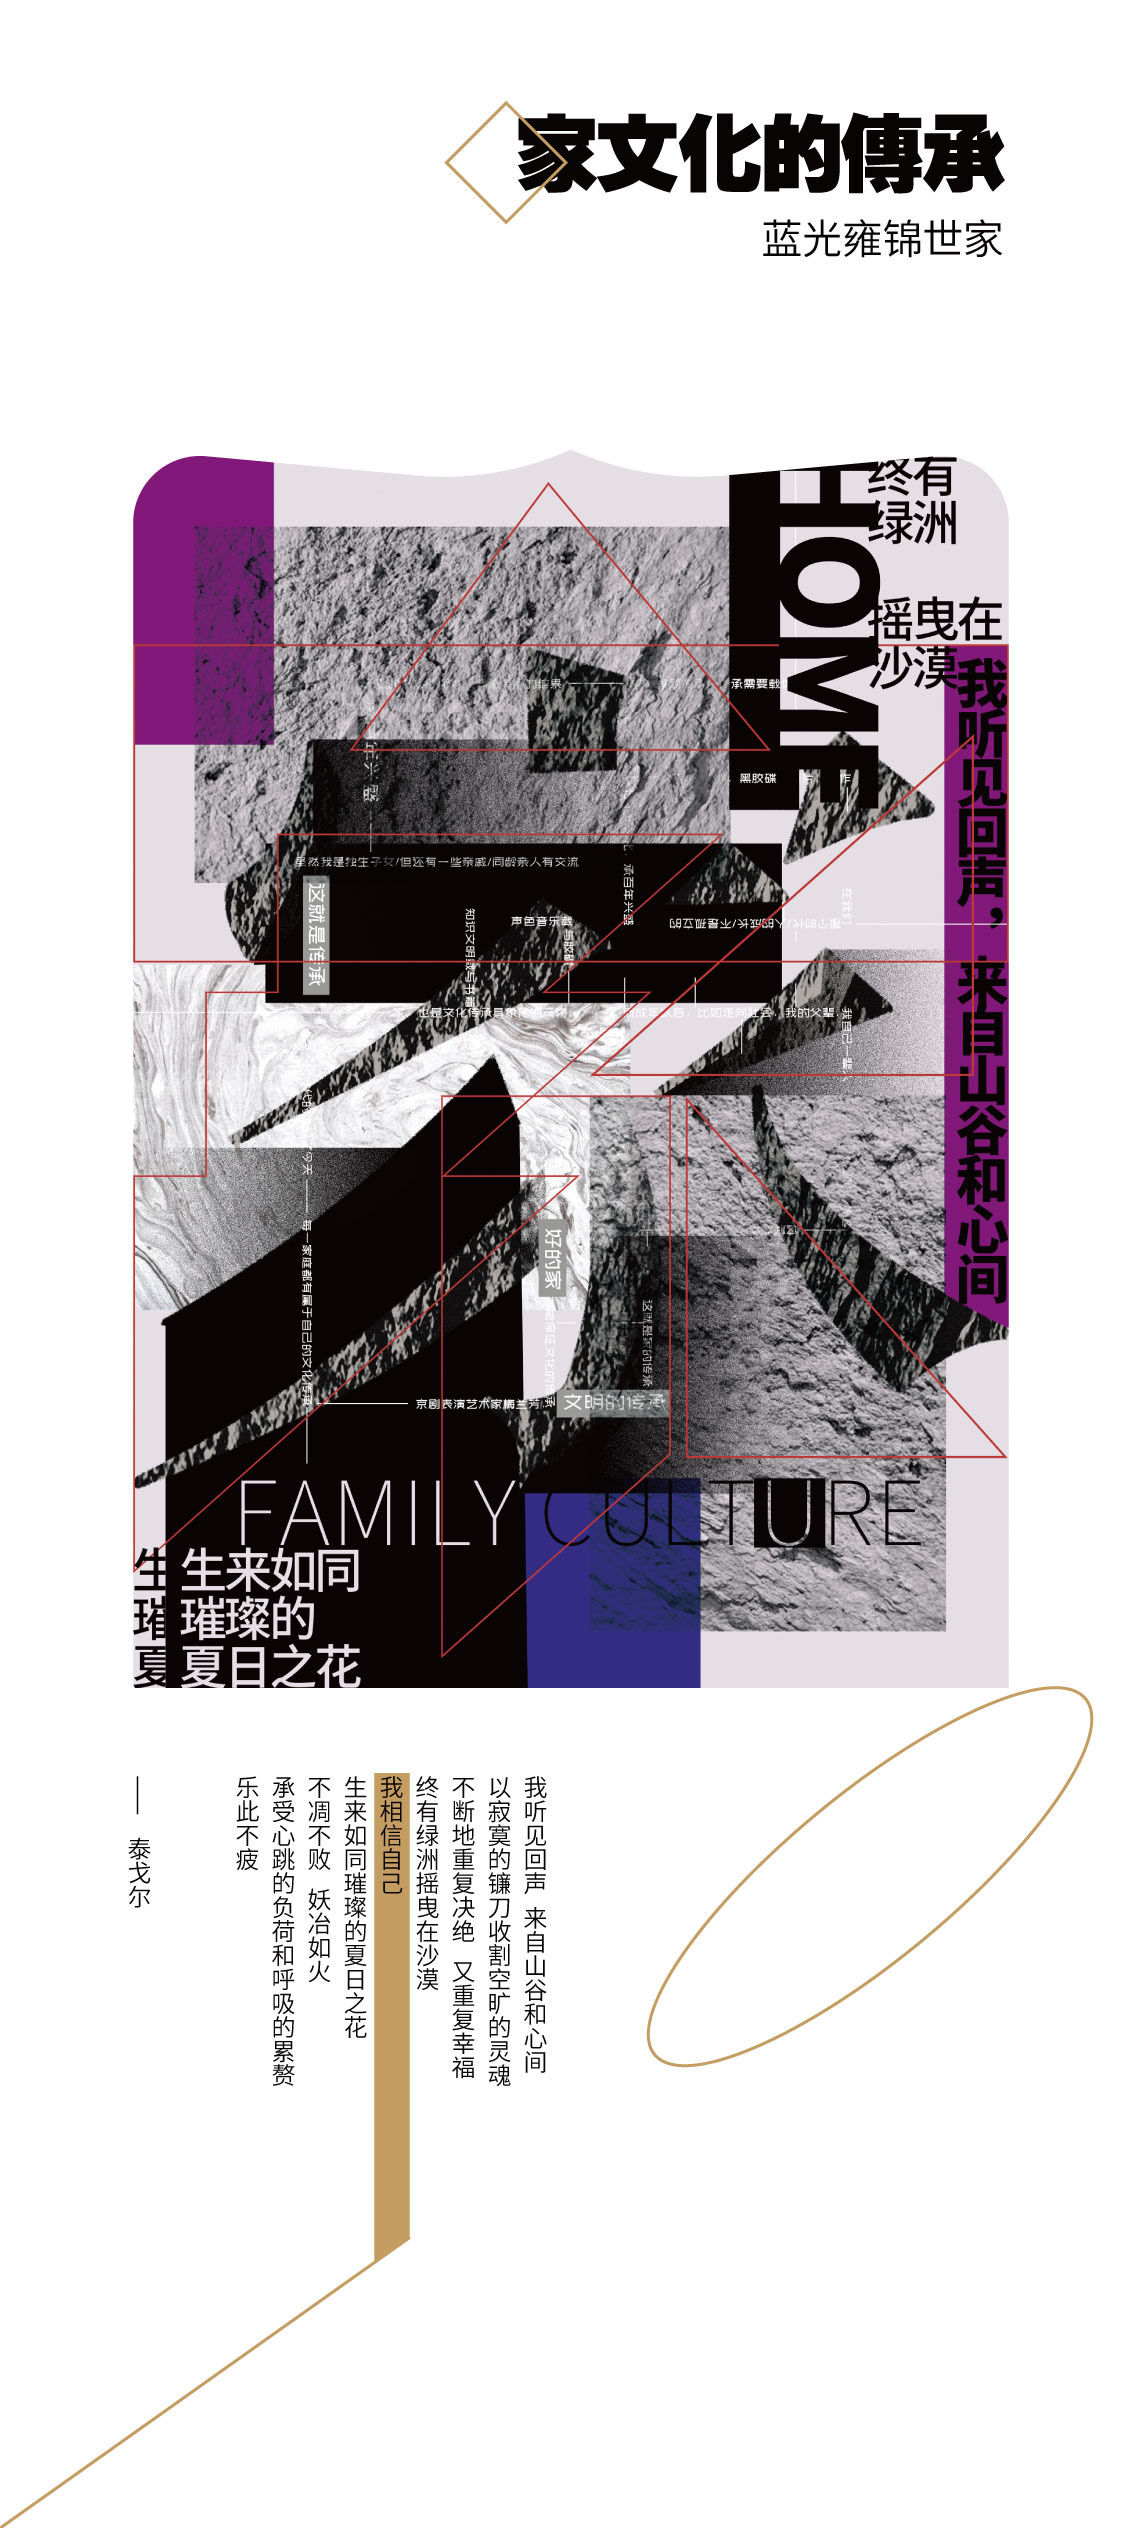 culture design family poster